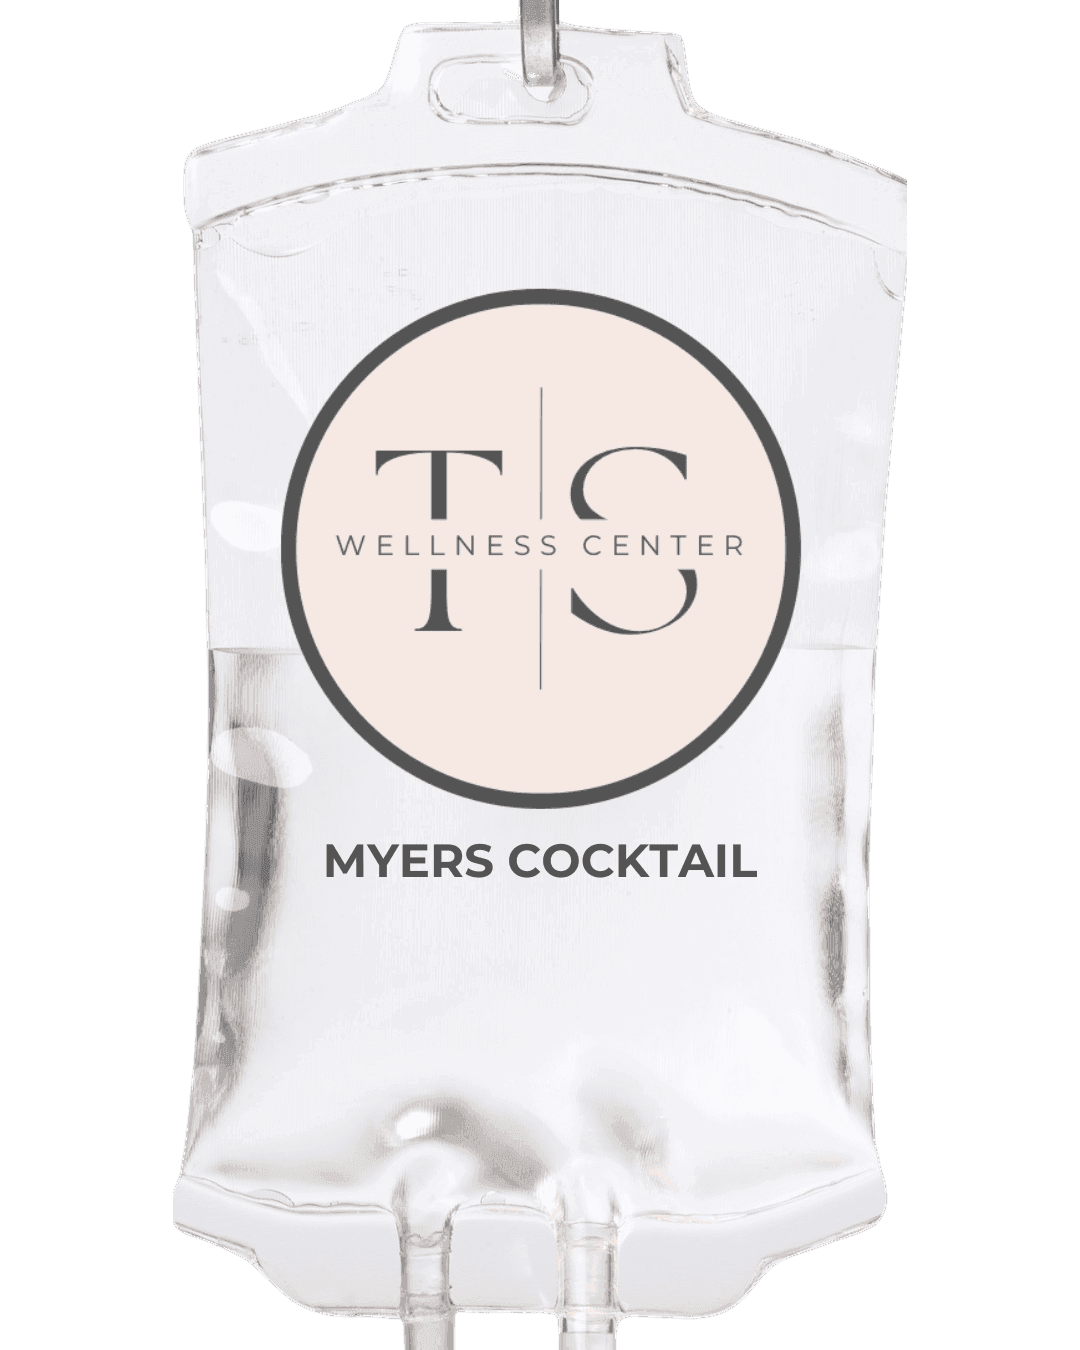 Myers Cocktail IV Infusion Tarpon Springs Wellness Center